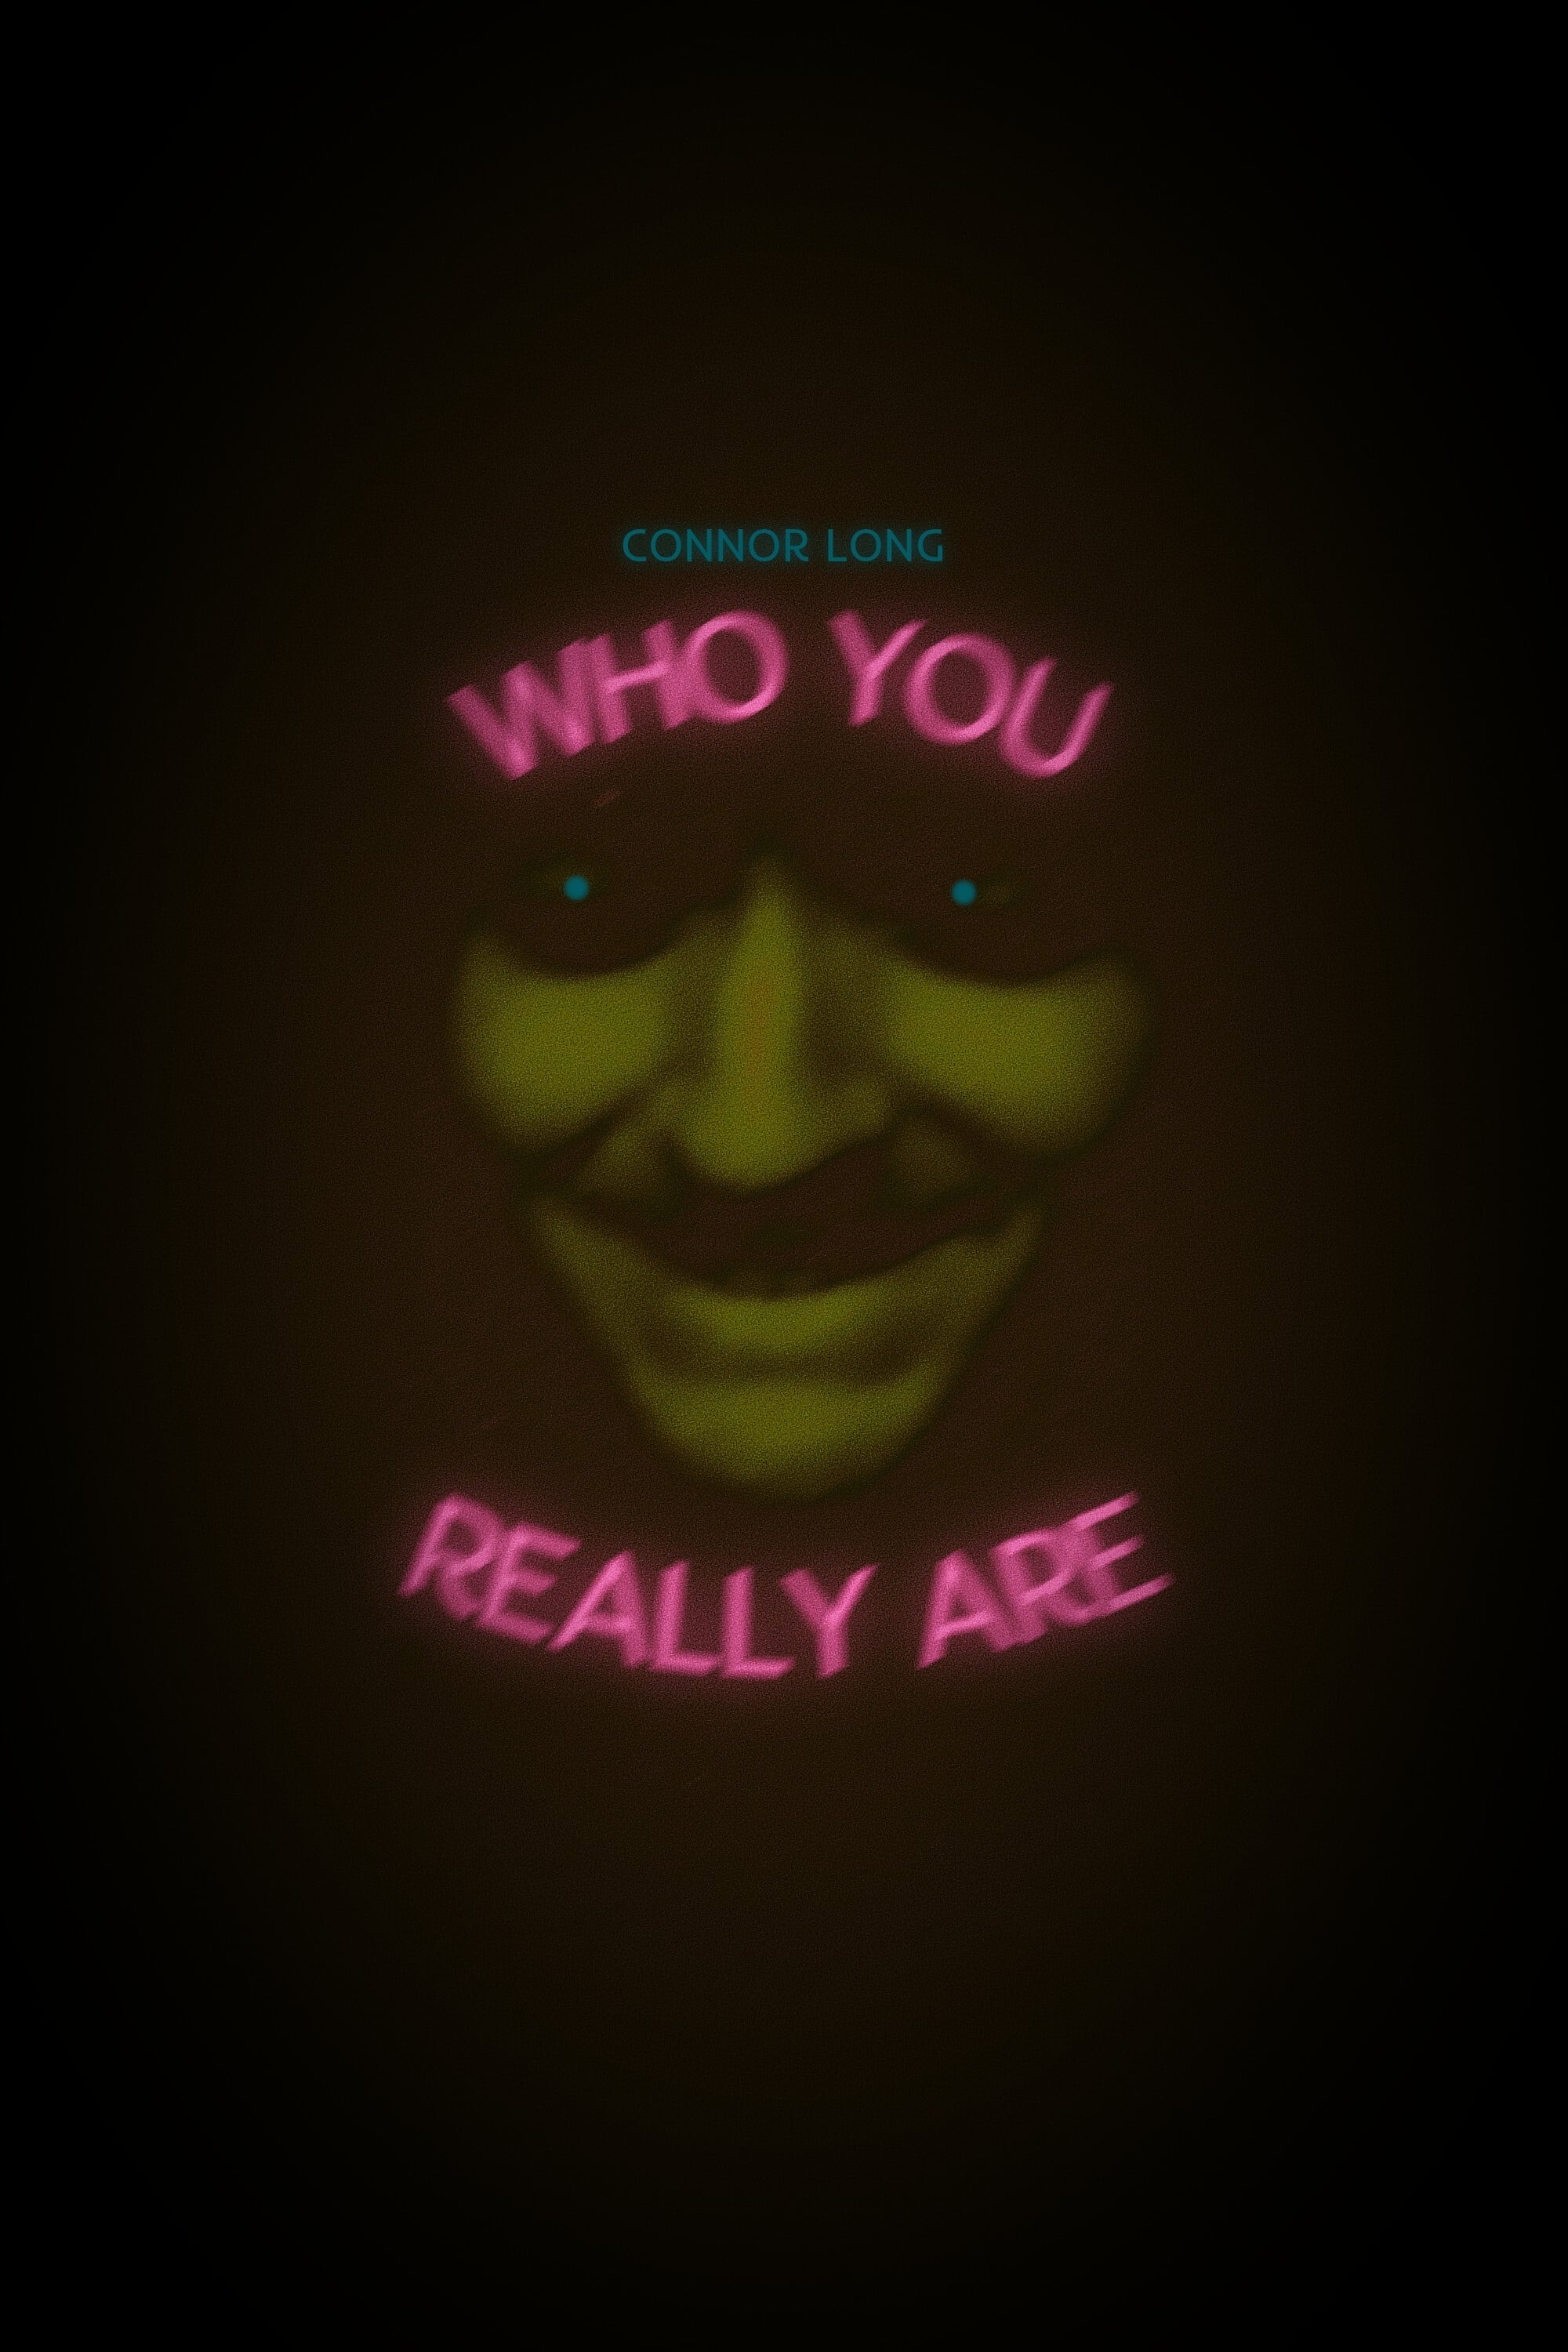 Who You Really Are